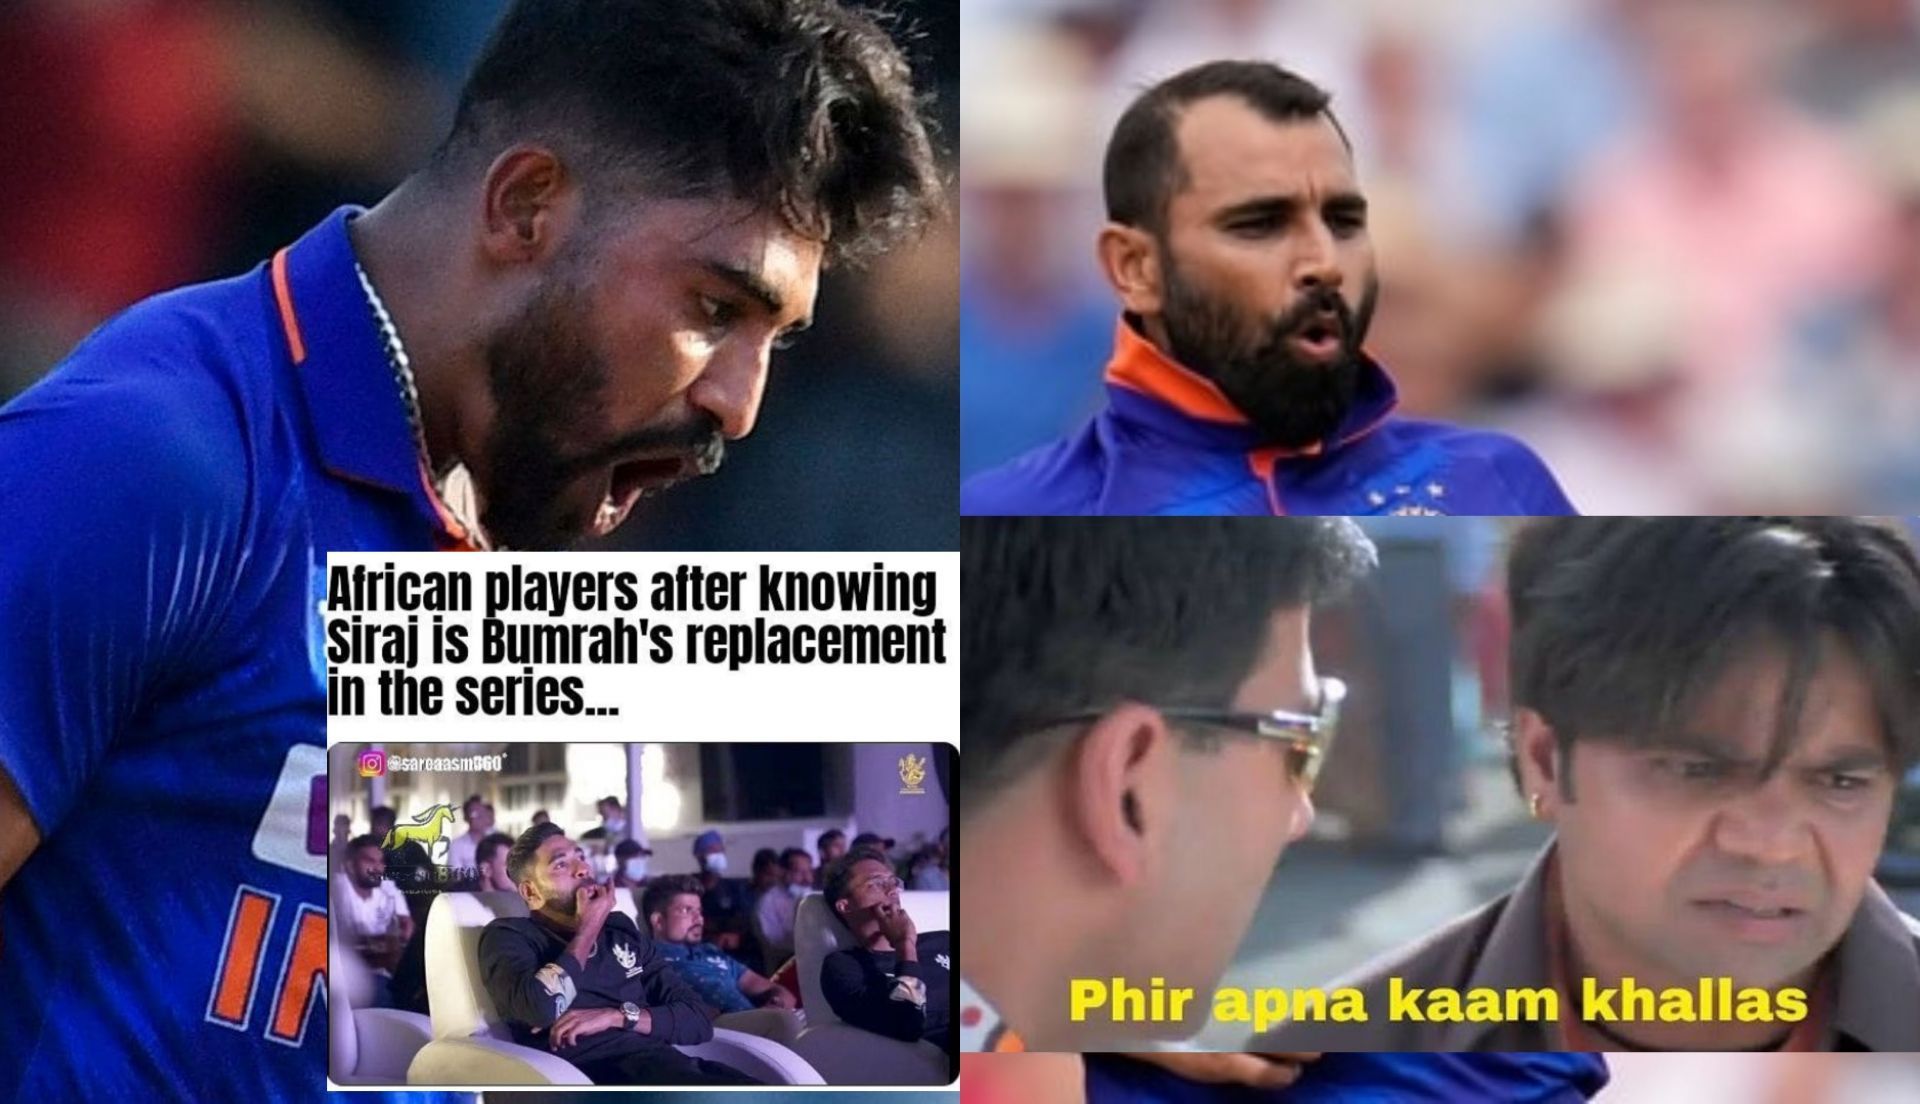 Fans react after Siraj replaces Jasprit Bumrah in the Indian squad for the current South Africa series